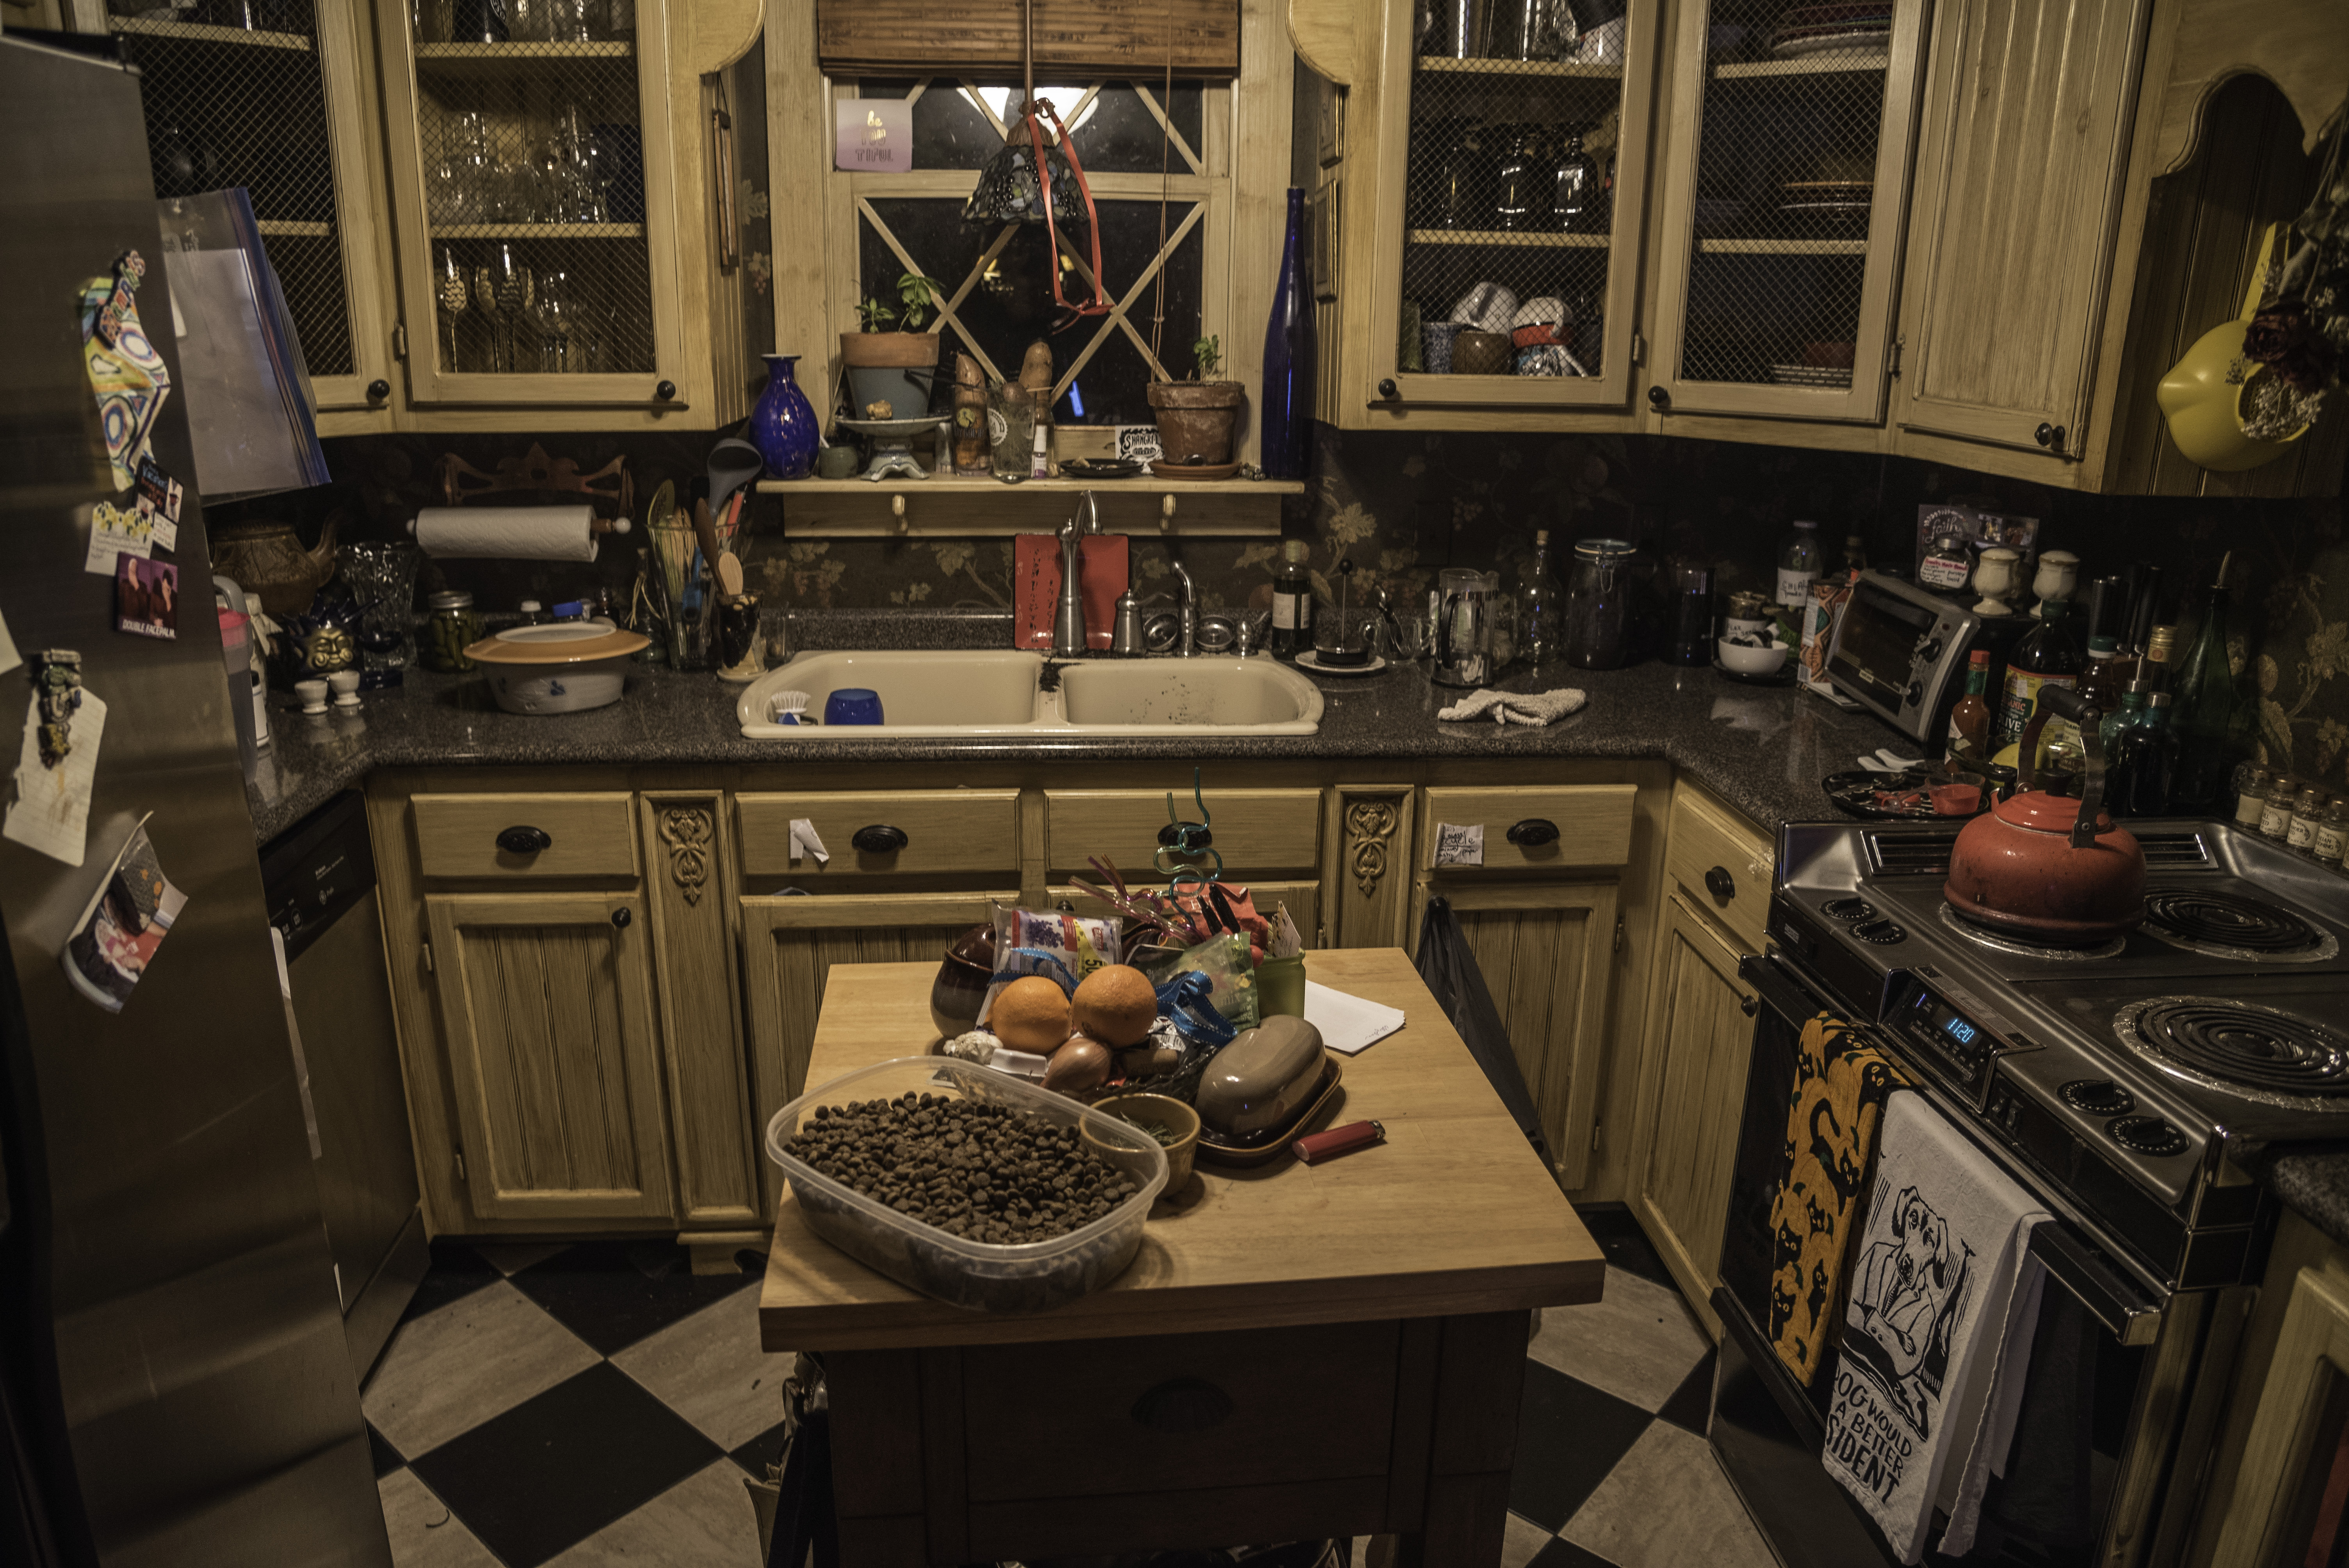 Small Kitchen in House image   Free stock photo   Public Domain ...